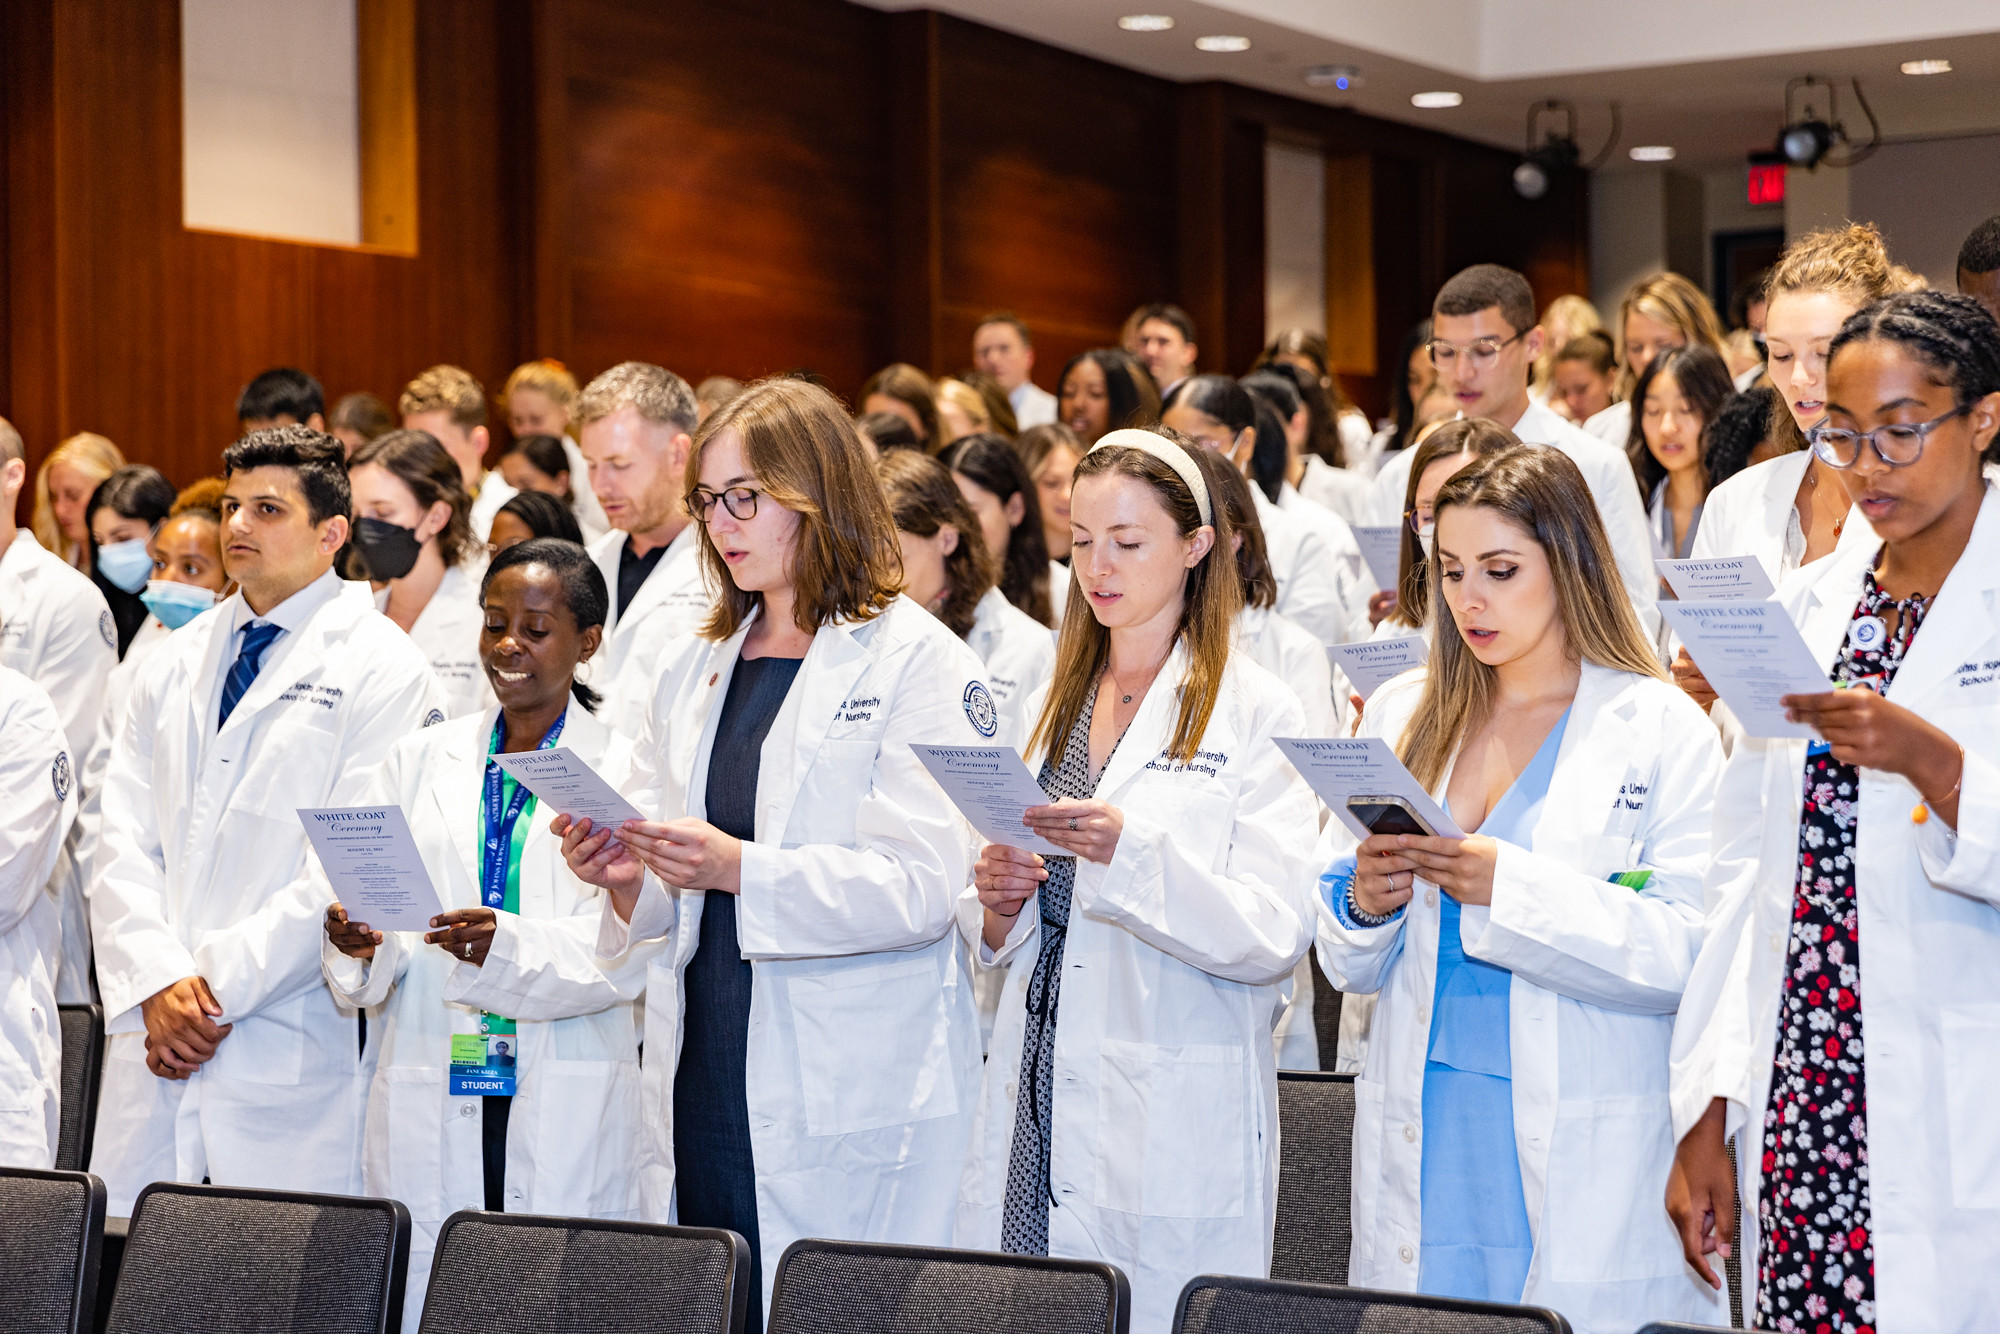 What is the White Coat Ceremony?